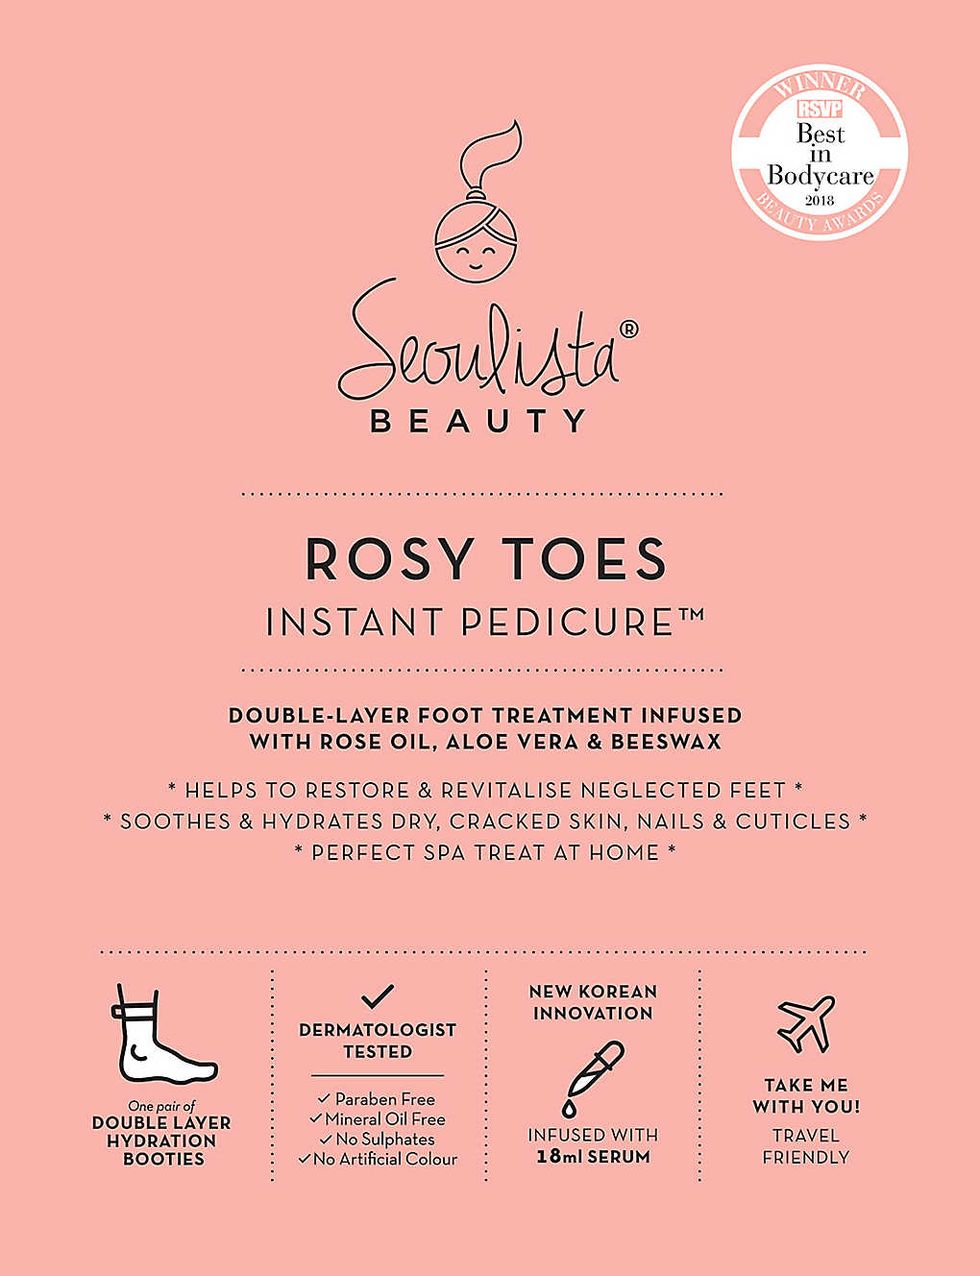 SEOULISTA ROSY TOES Instant Pedicure